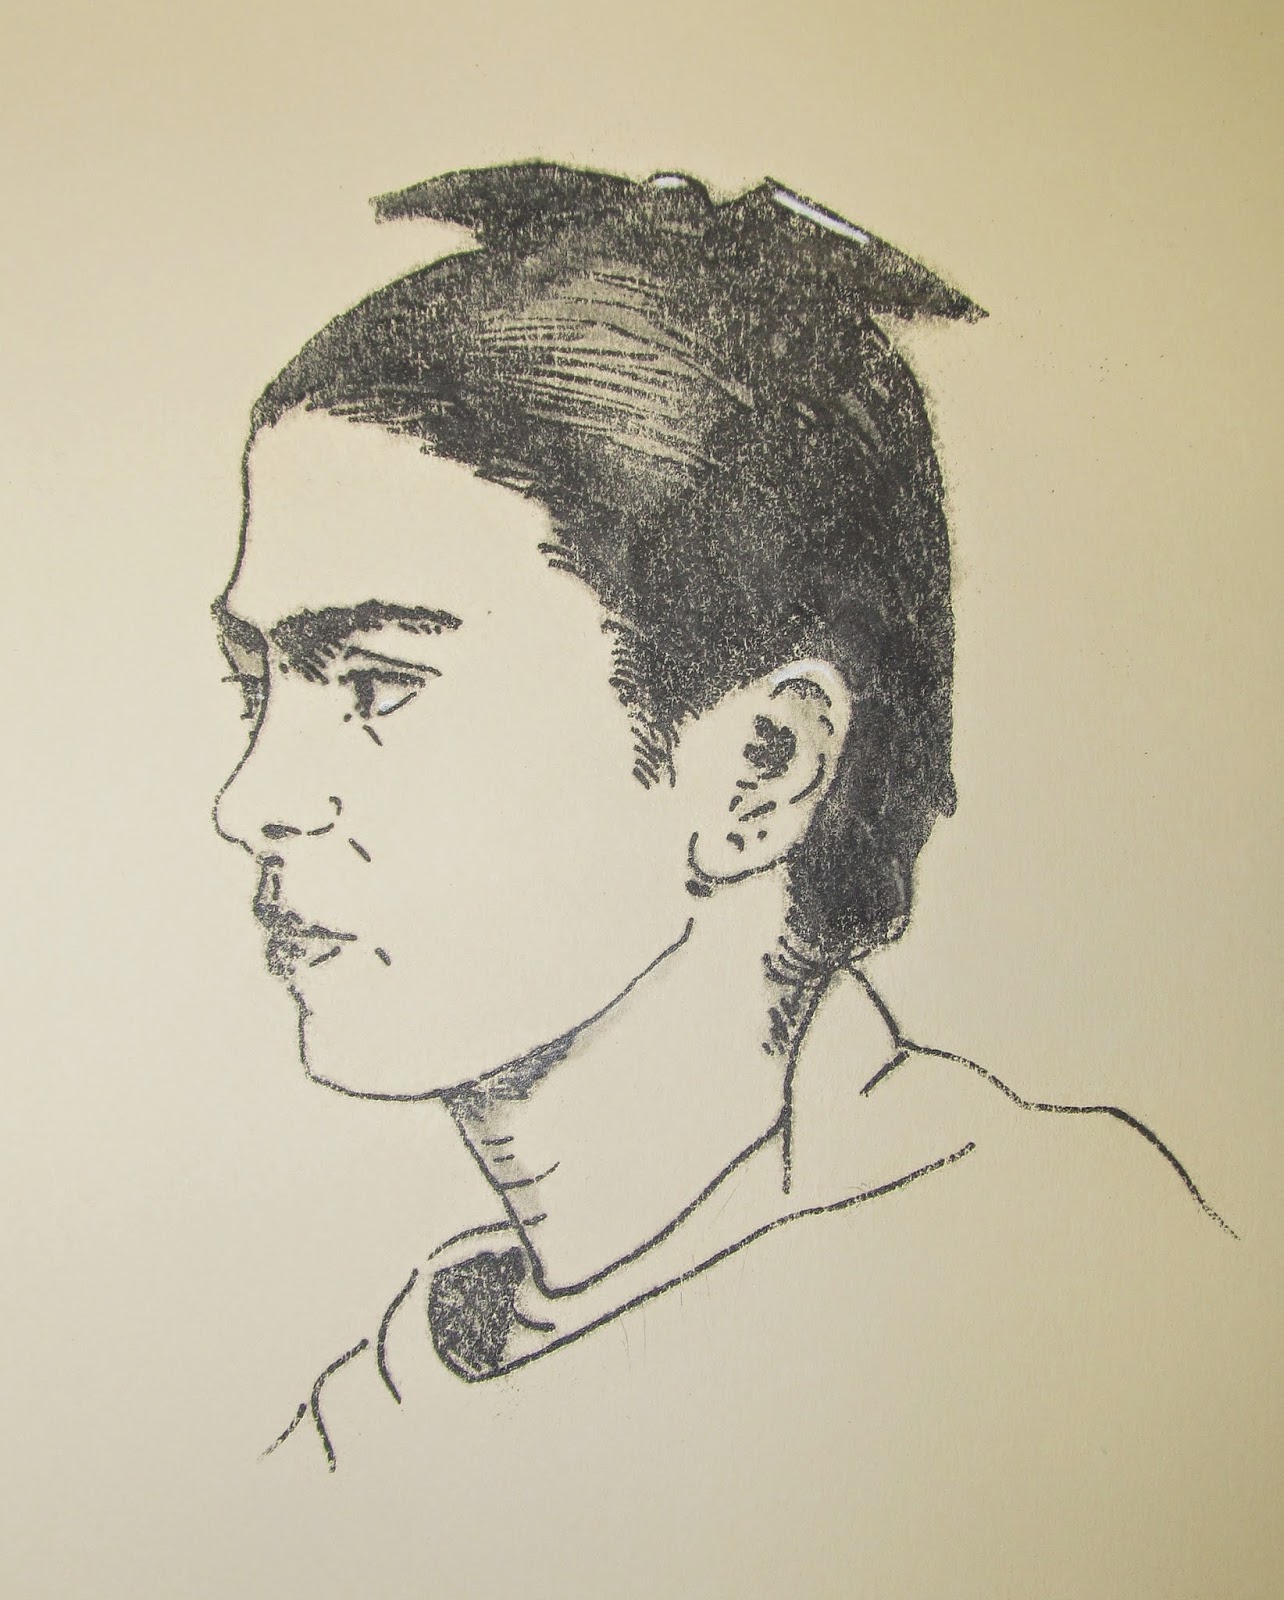 Frida Kahlo. Intaglio Etching. Edition of 10. 8 3/8 x 61/2 inches. Circa 1980 by F. Lennox Campello